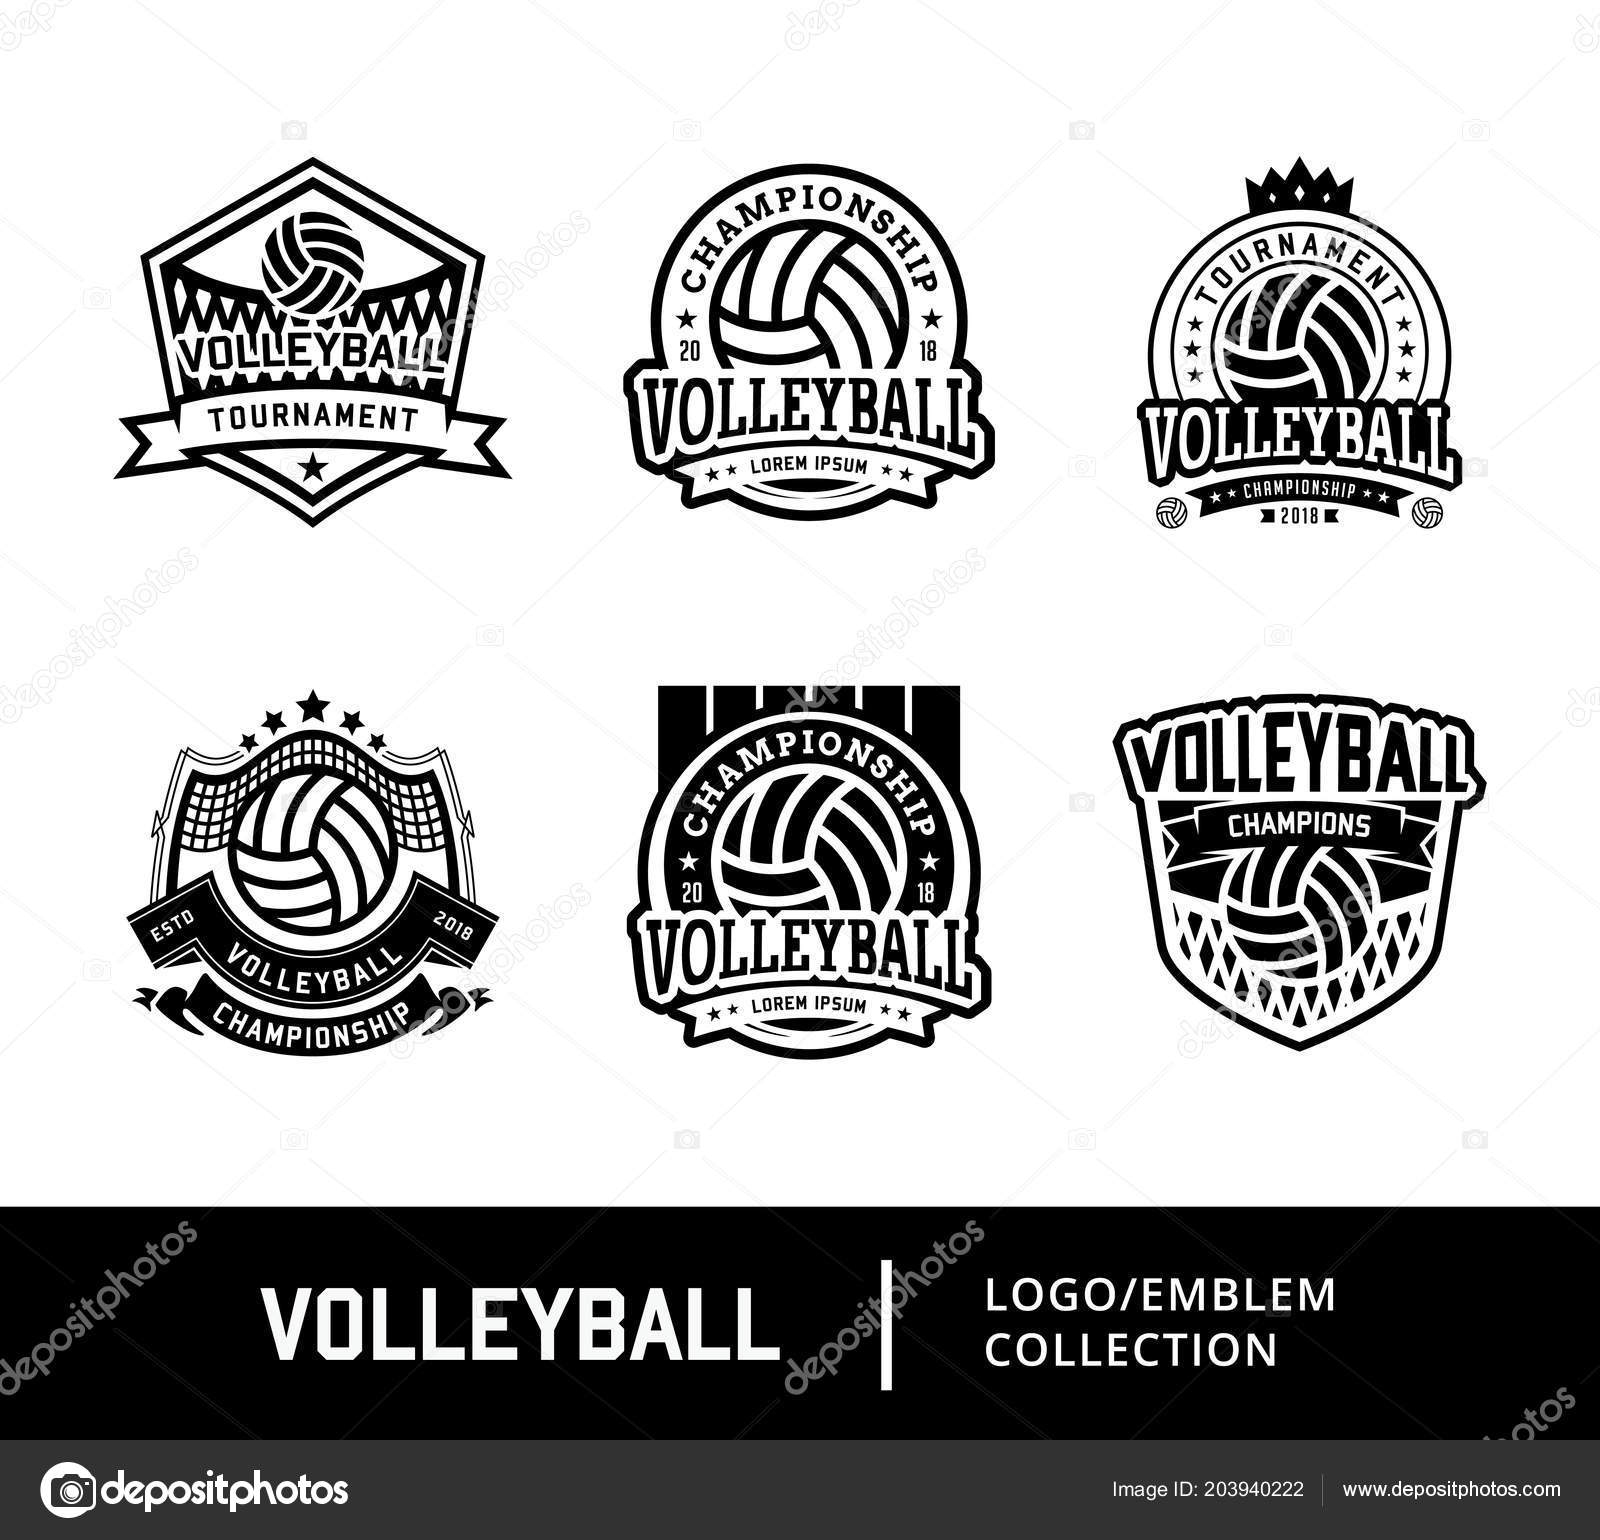 Volleyball championship logo, emblem, icons, designs templates with  volleyball ball and shield on a light background Stock Vector